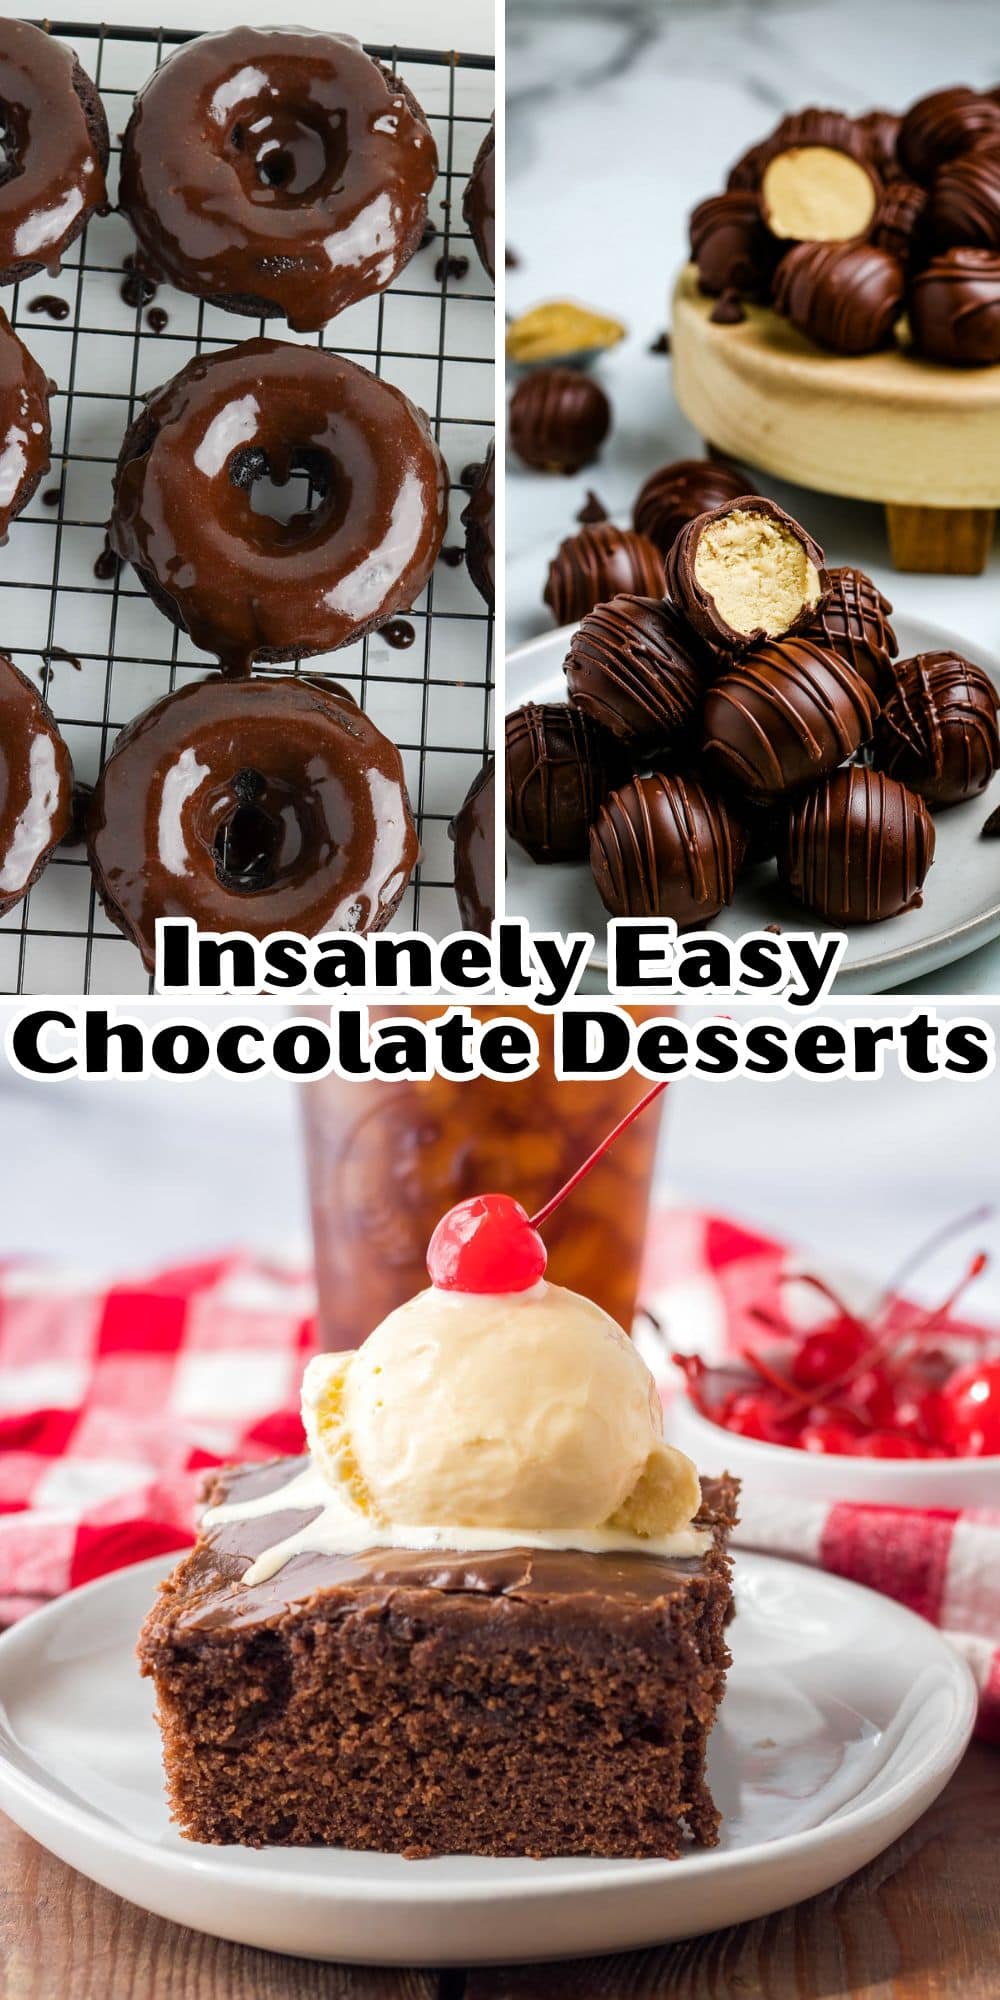 Insanely easy chocolate desserts.